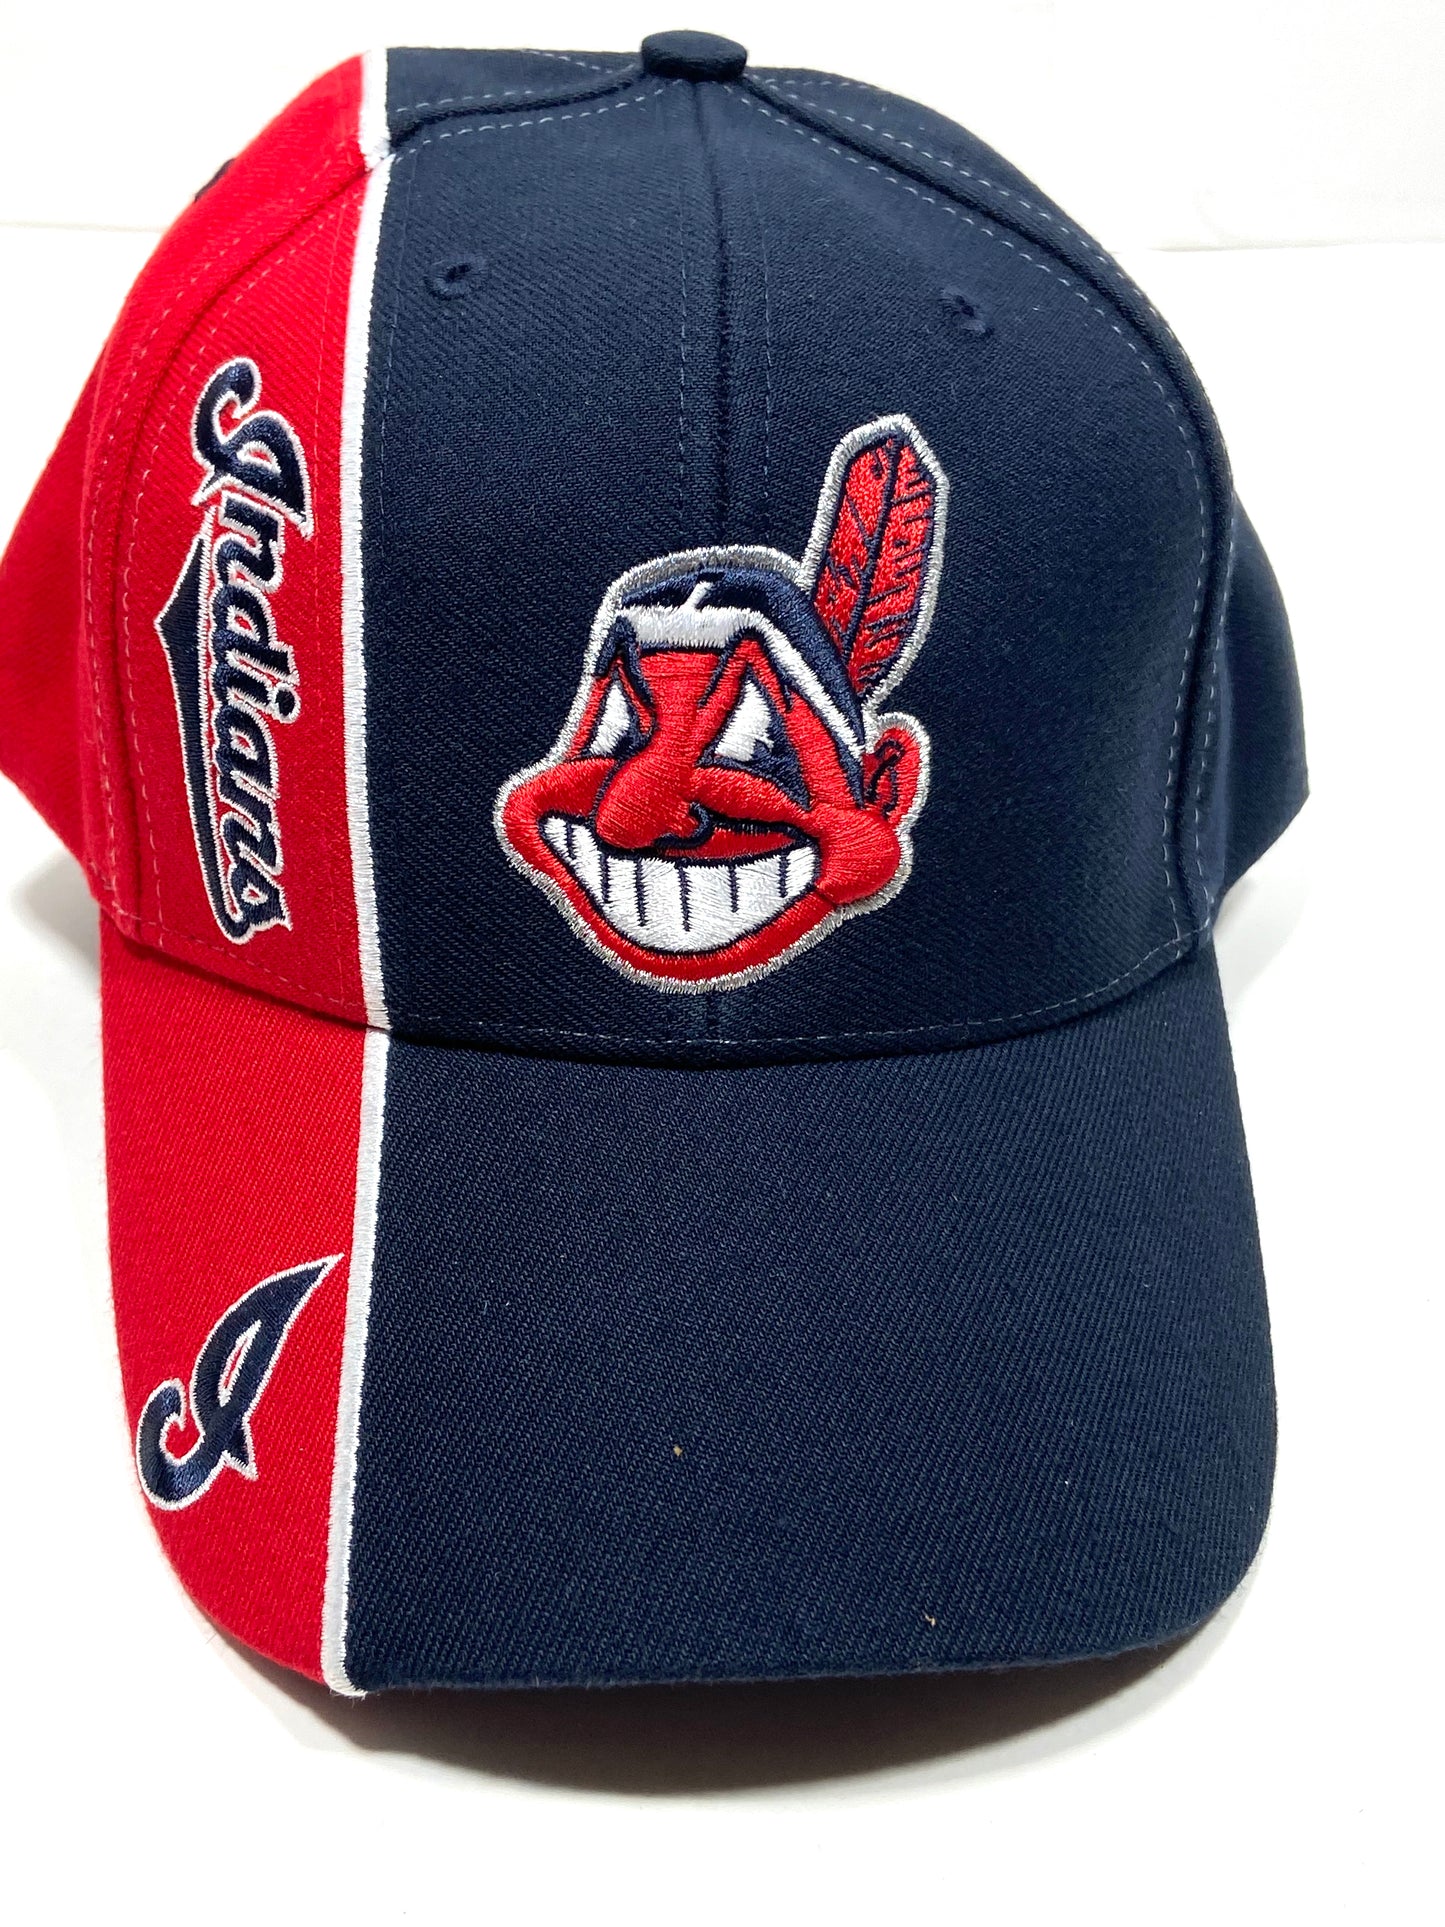 Cleveland Indians Vintage MLB Two-Tone 15% Wool Wahoo Hat By Twins Enterprise